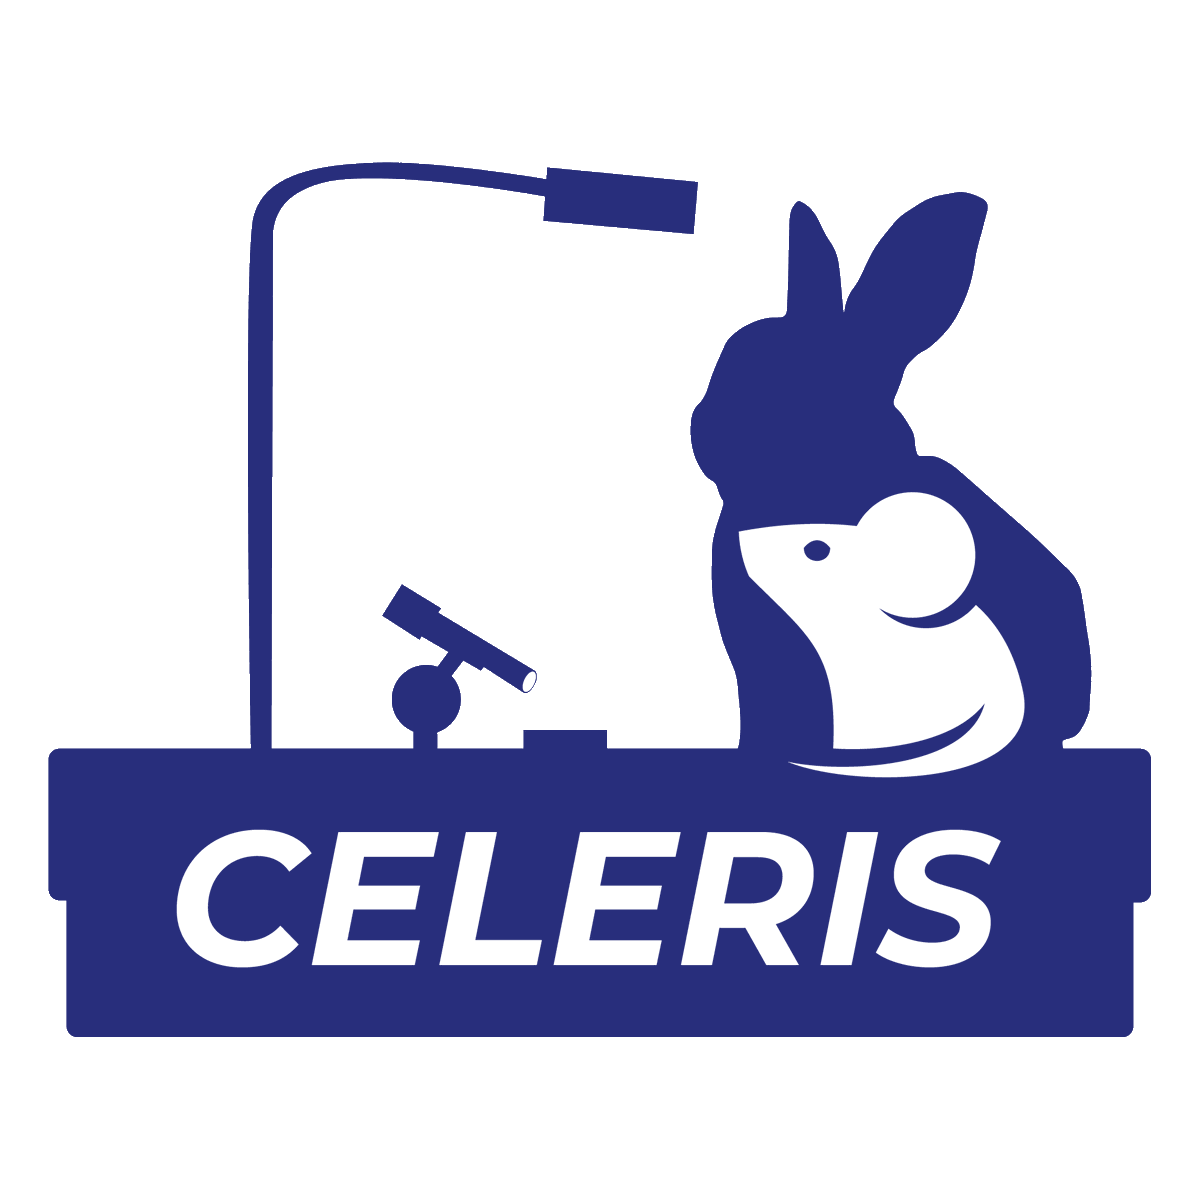 Come see the Celeris at ARVO booth 1831! Check out our premier rodent ERG/VEP system for rodents, rabbits, and more. 

#ARVO2024 #Electrophysiology #VisionResearch
hubs.la/Q02vLczr0